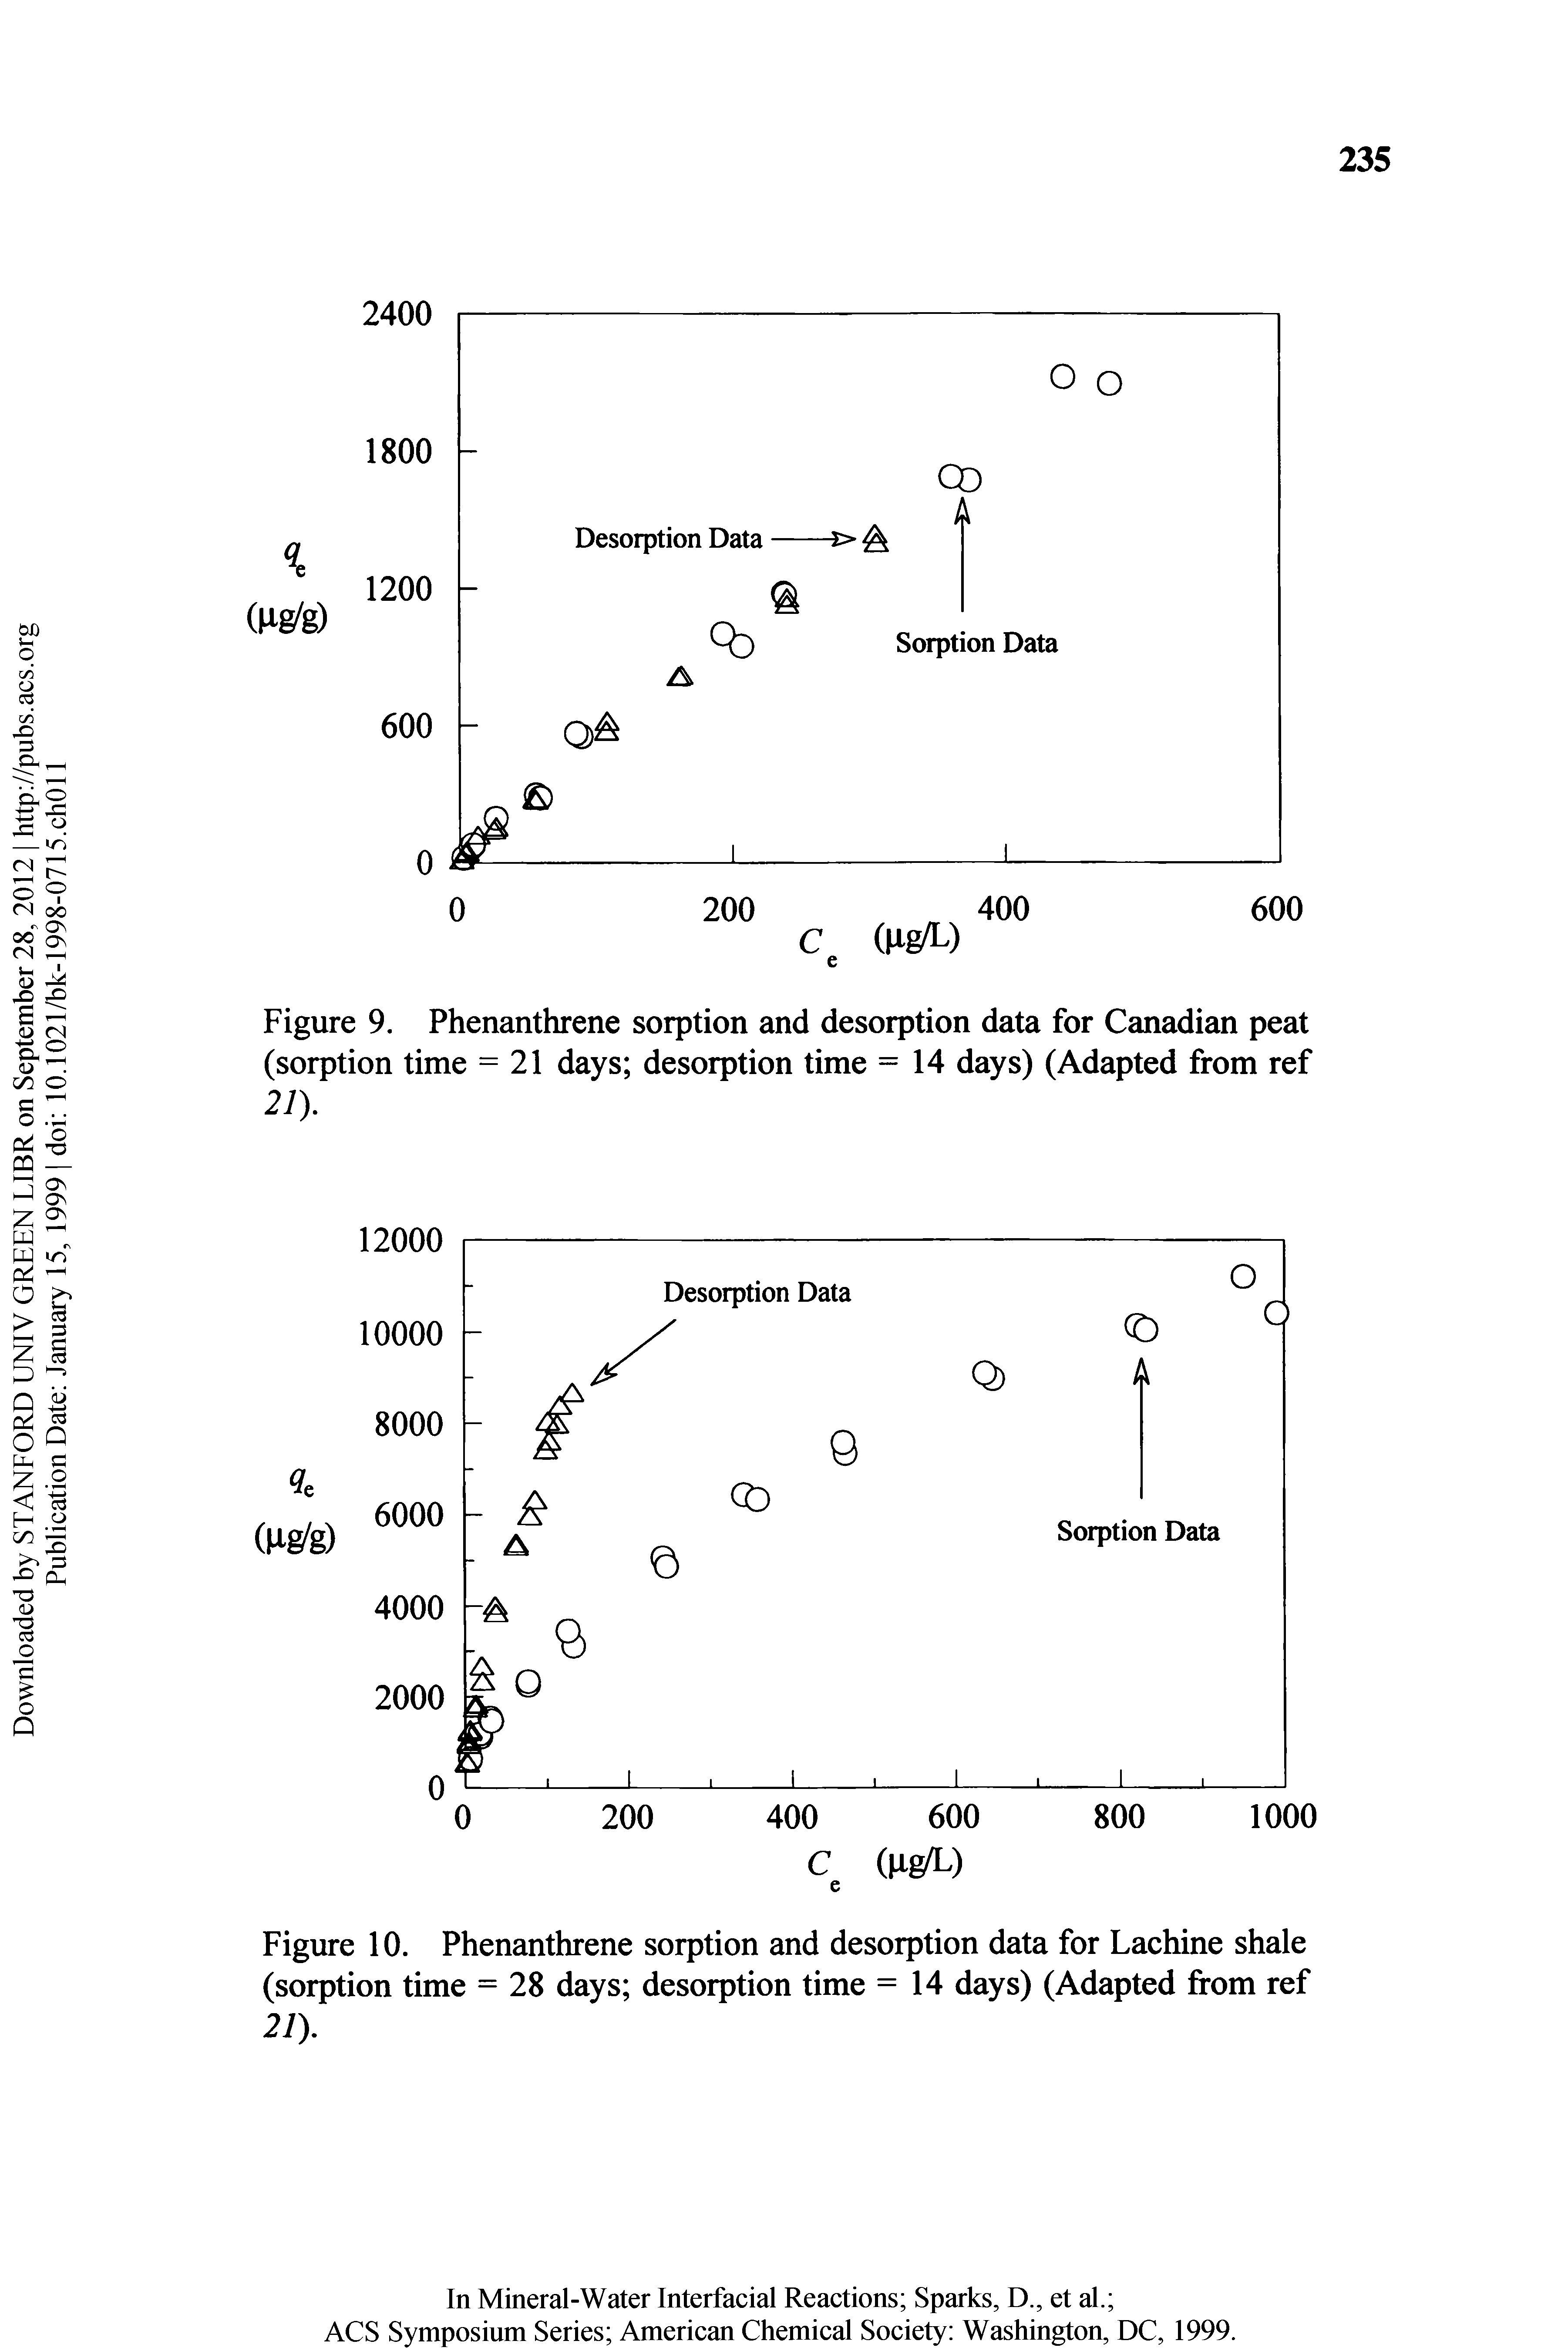 Figure 9. Phenanthrene sorption and desorption data for Canadian peat (sorption time = 21 days desorption time =14 days) (Adapted from ref 21).